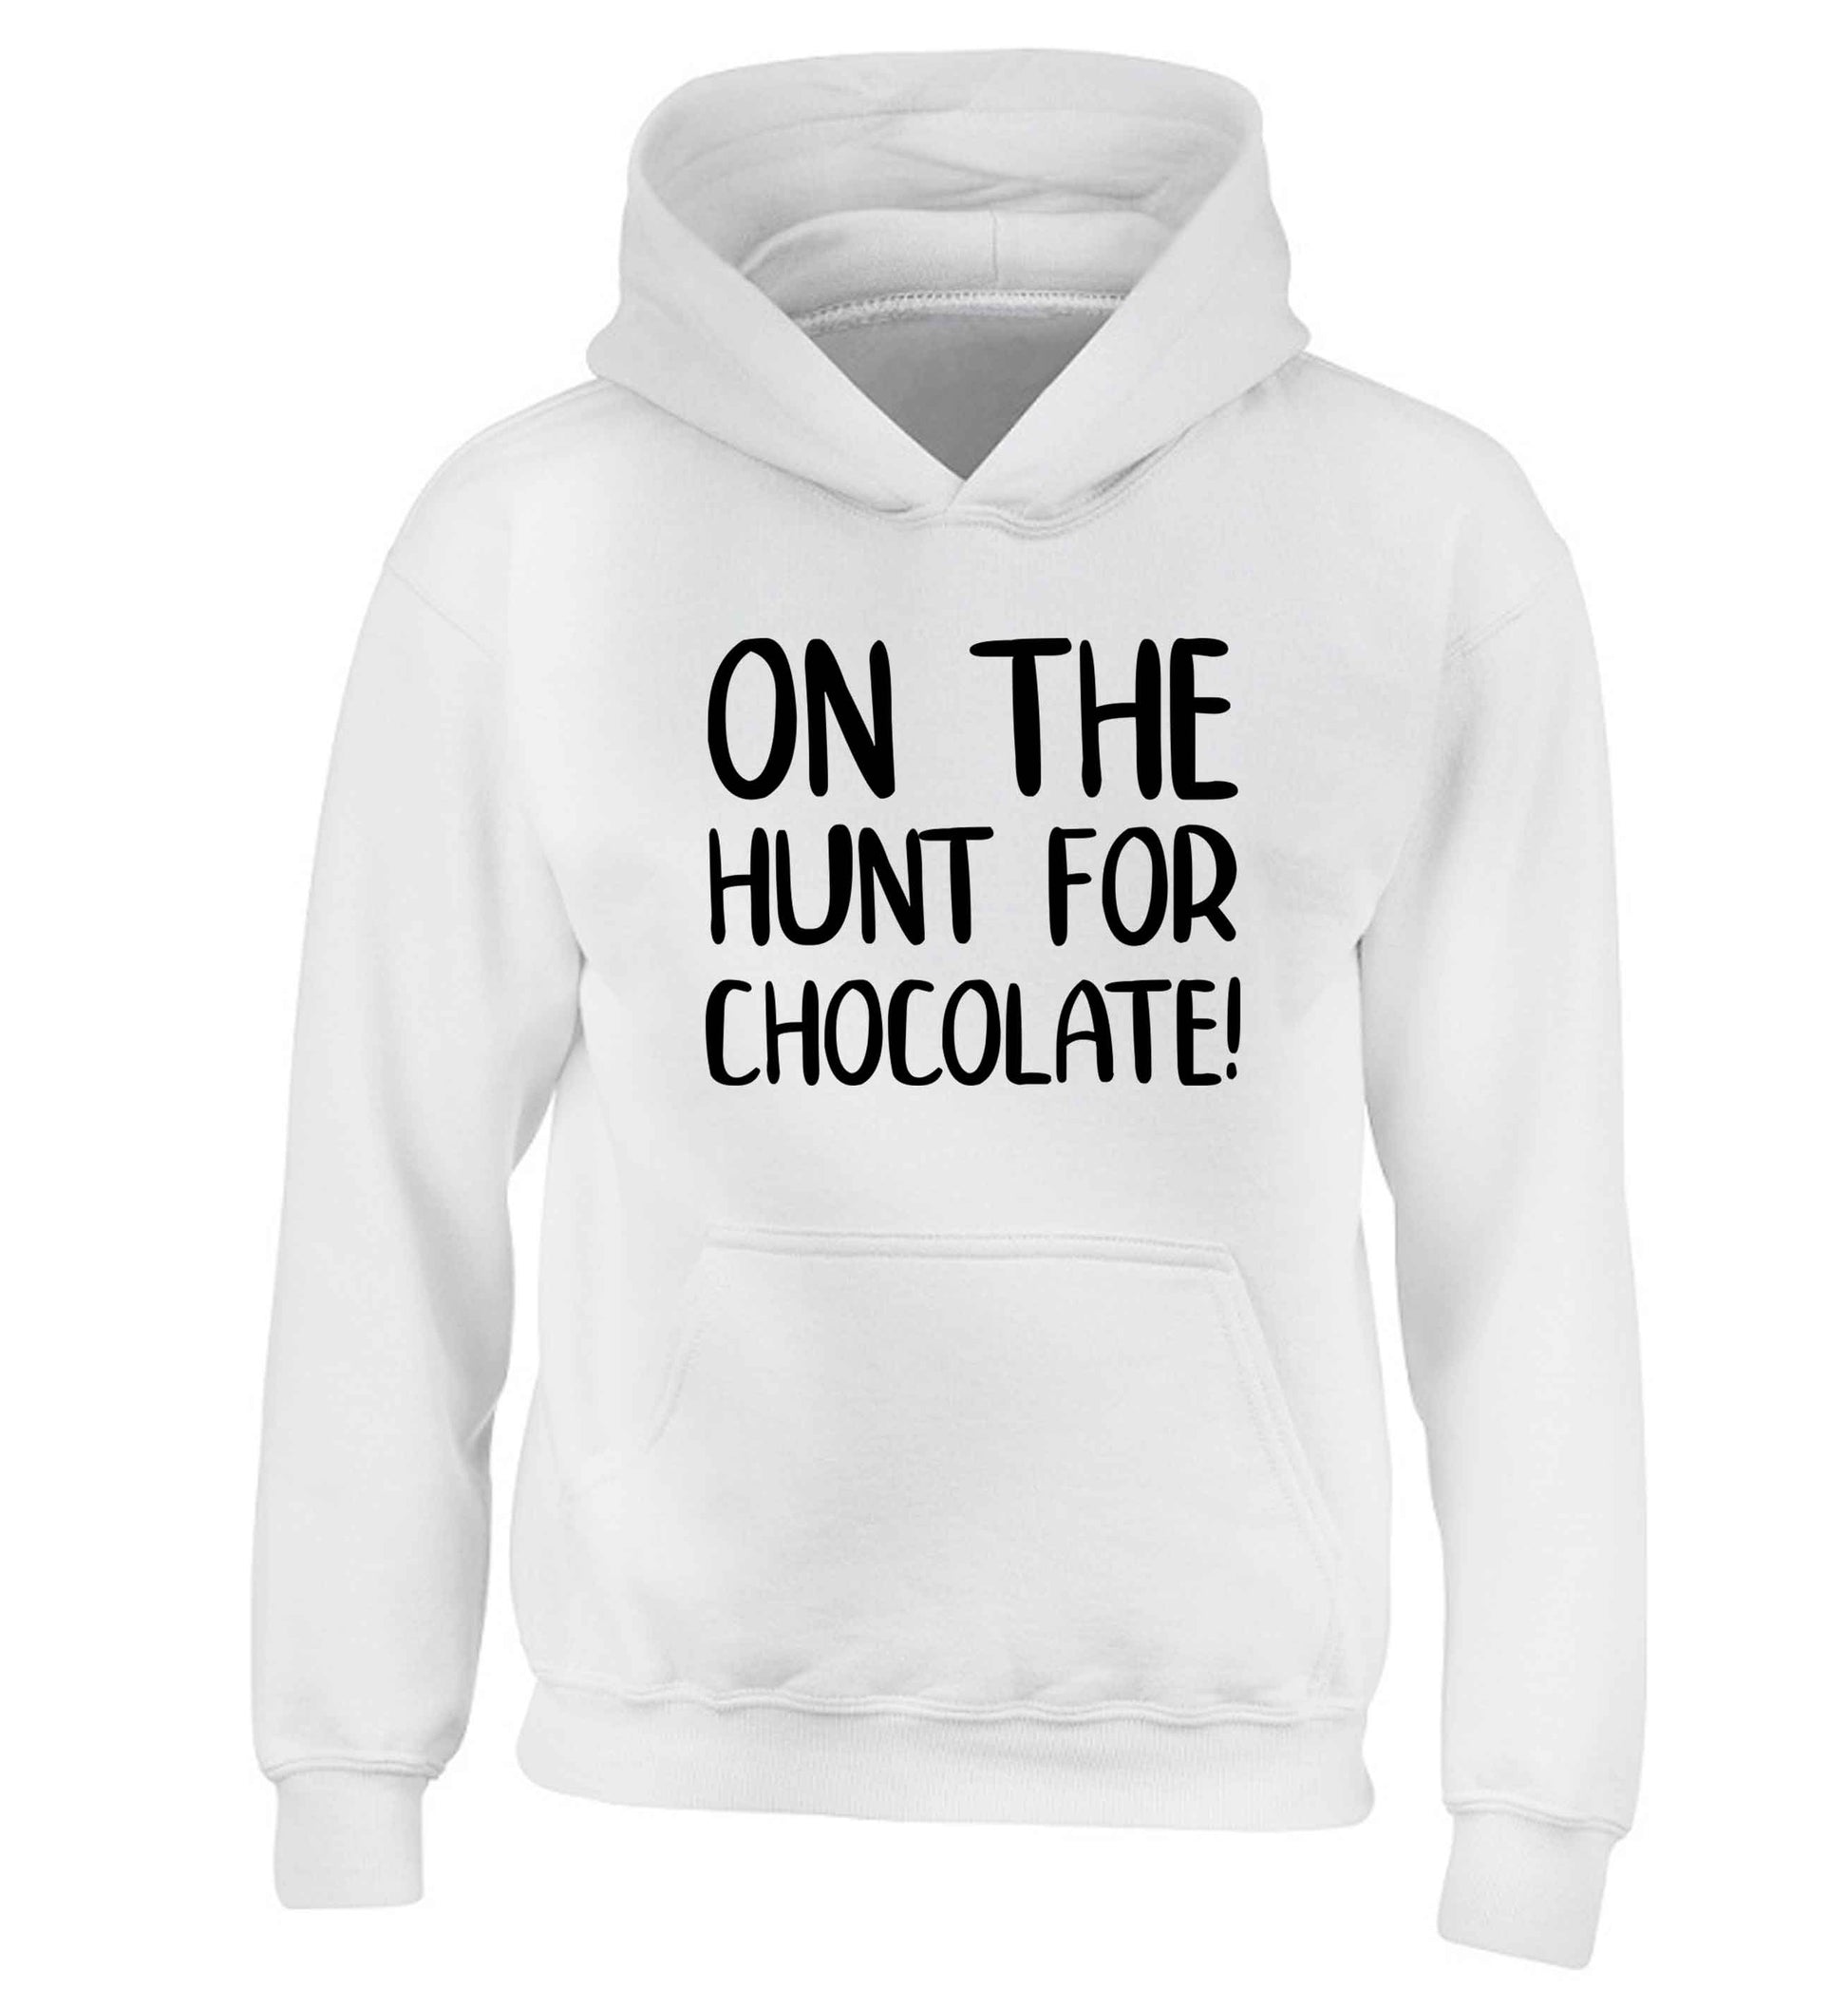 On the hunt for chocolate! children's white hoodie 12-13 Years